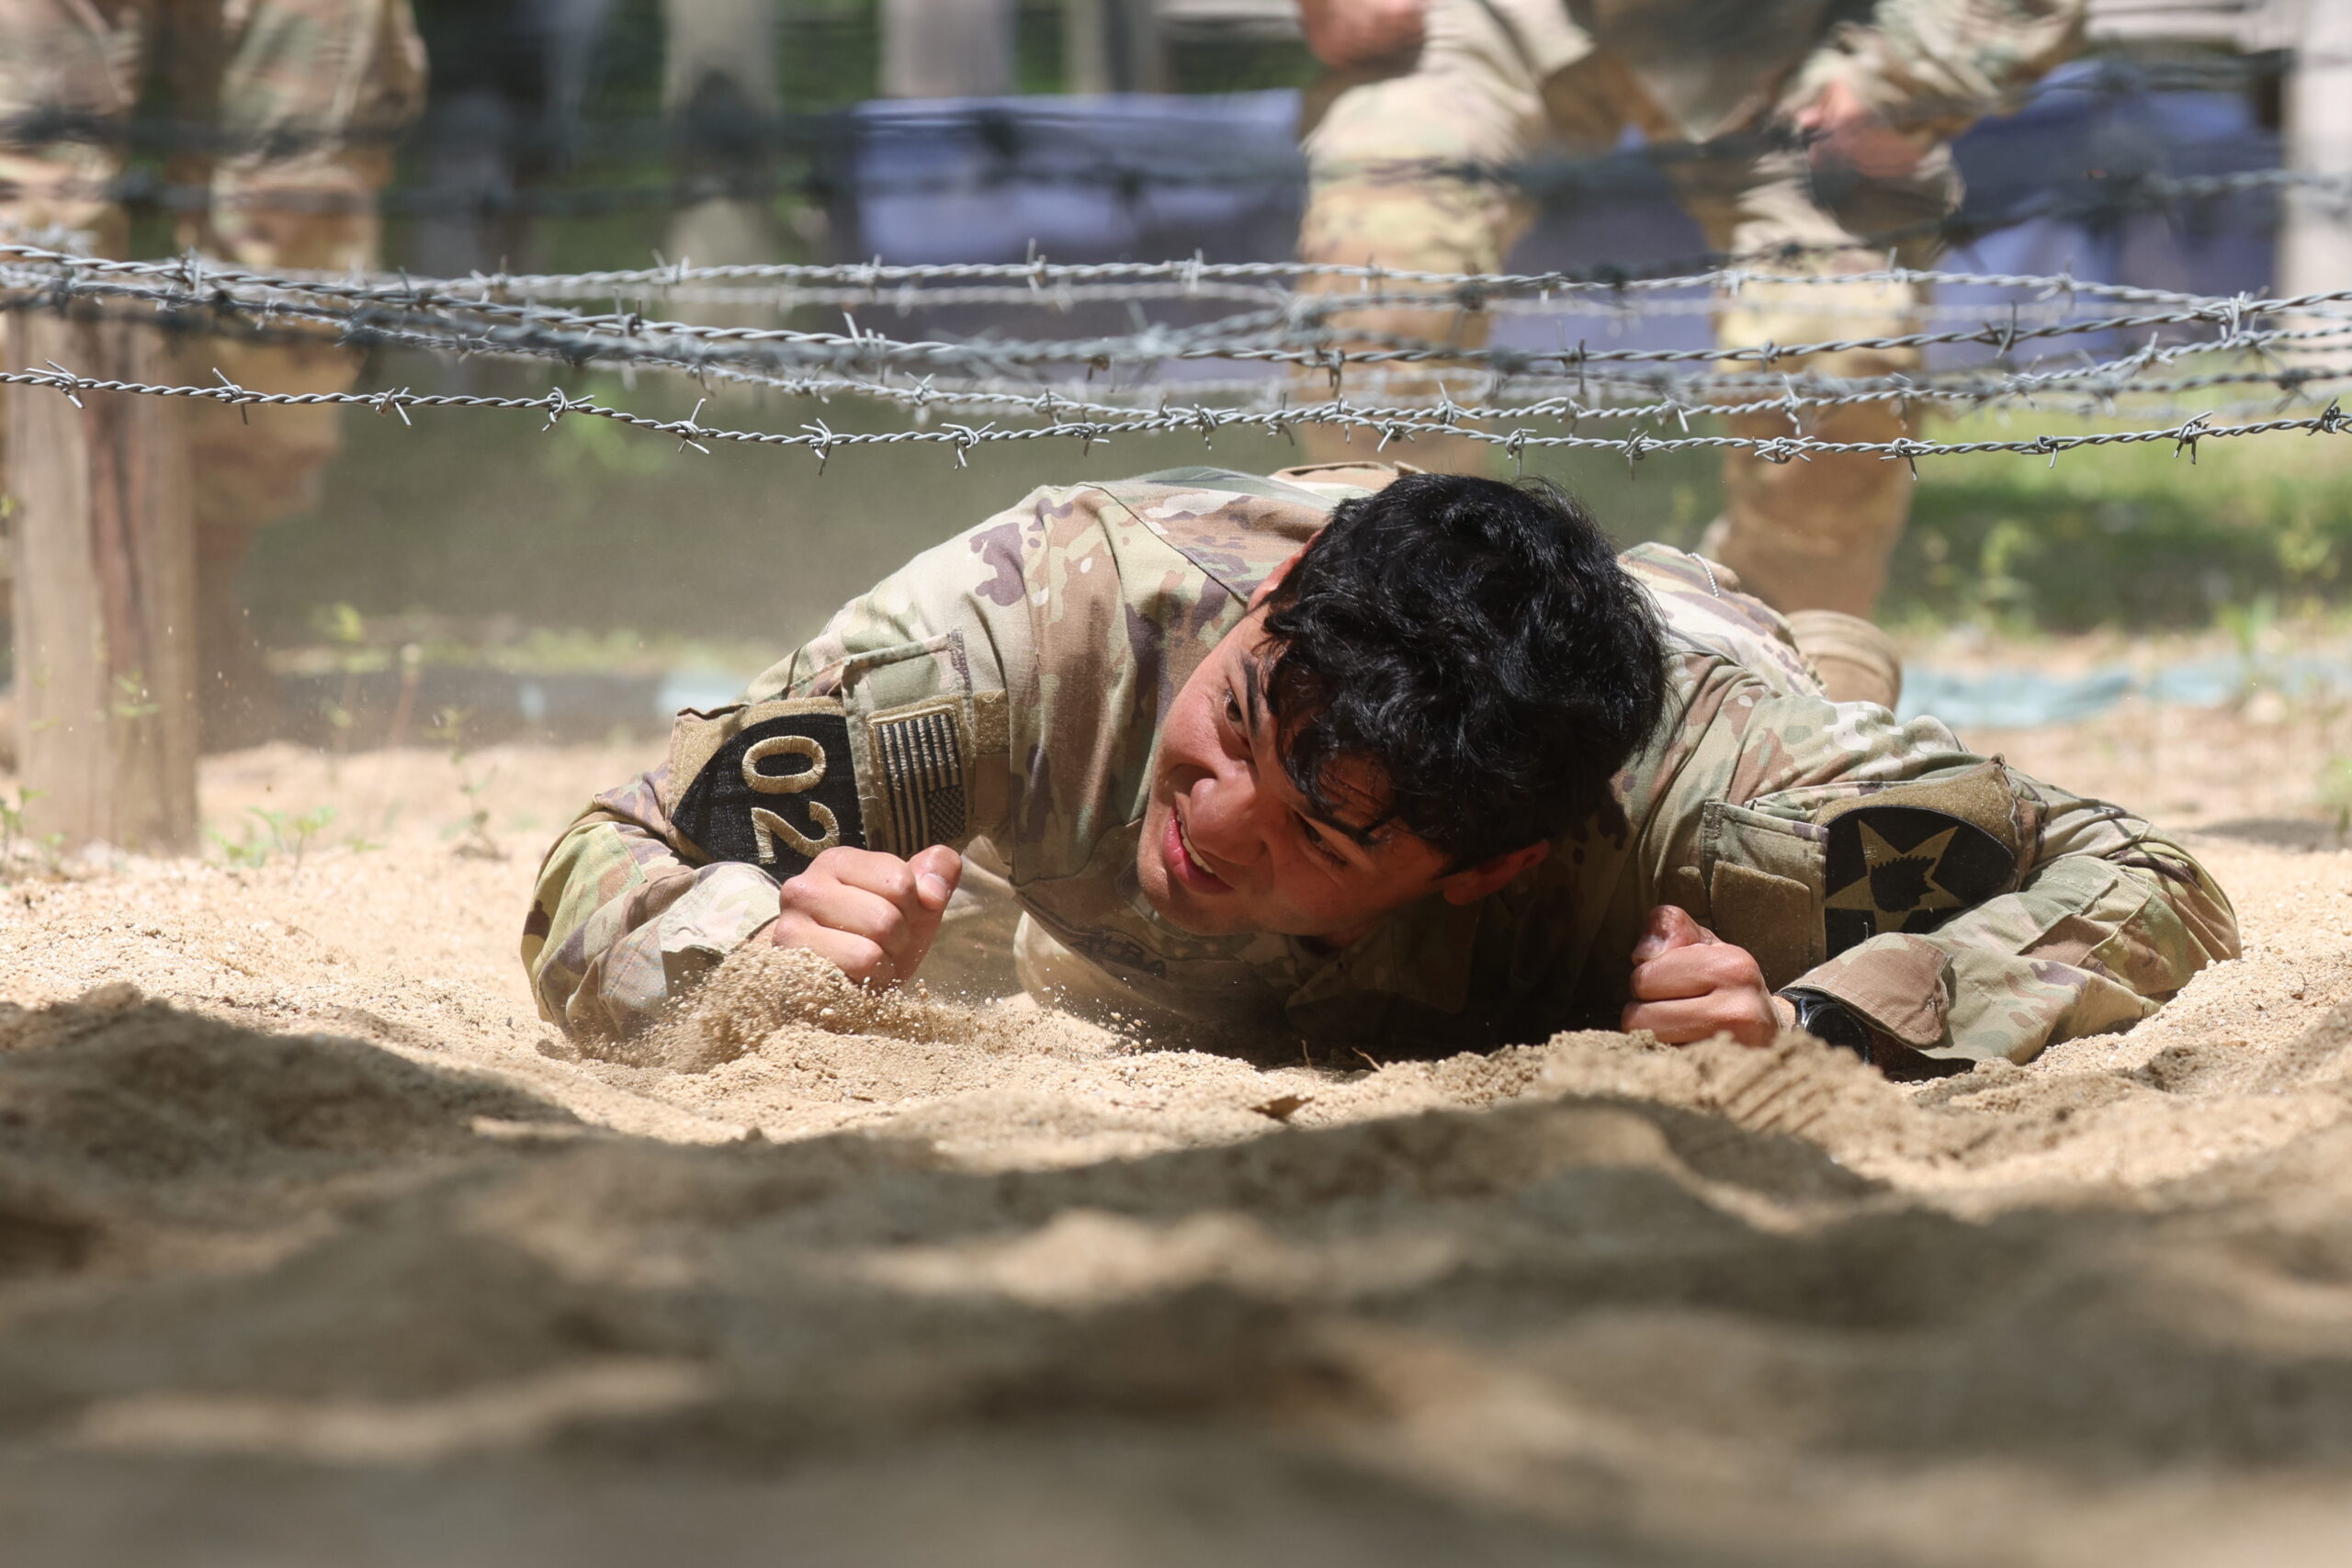 U.S. Army's Best Squad competition